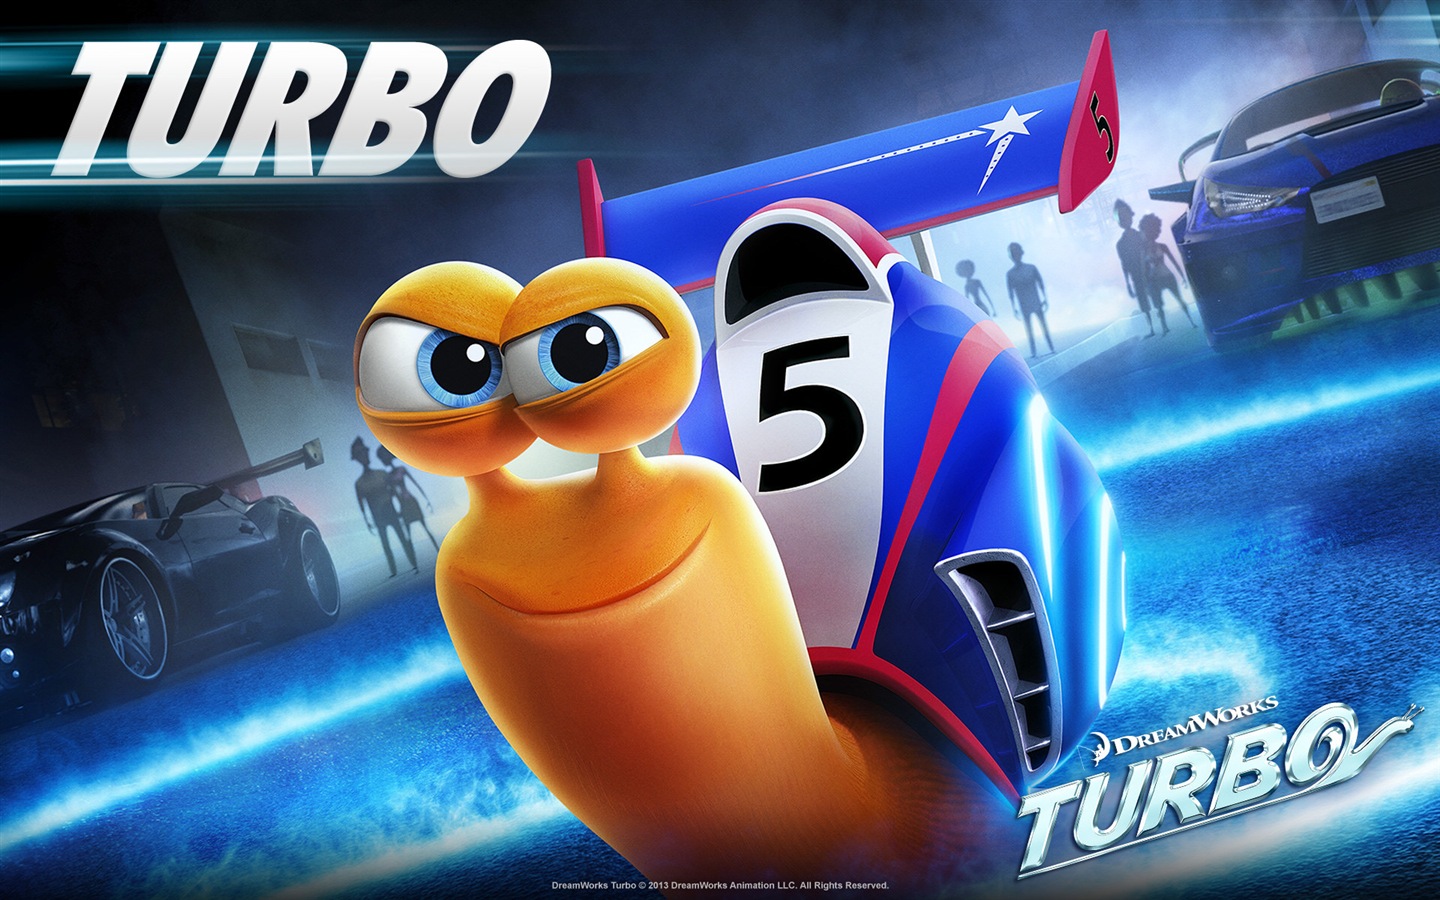 Turbo 3D movie HD wallpapers #9 - 1440x900